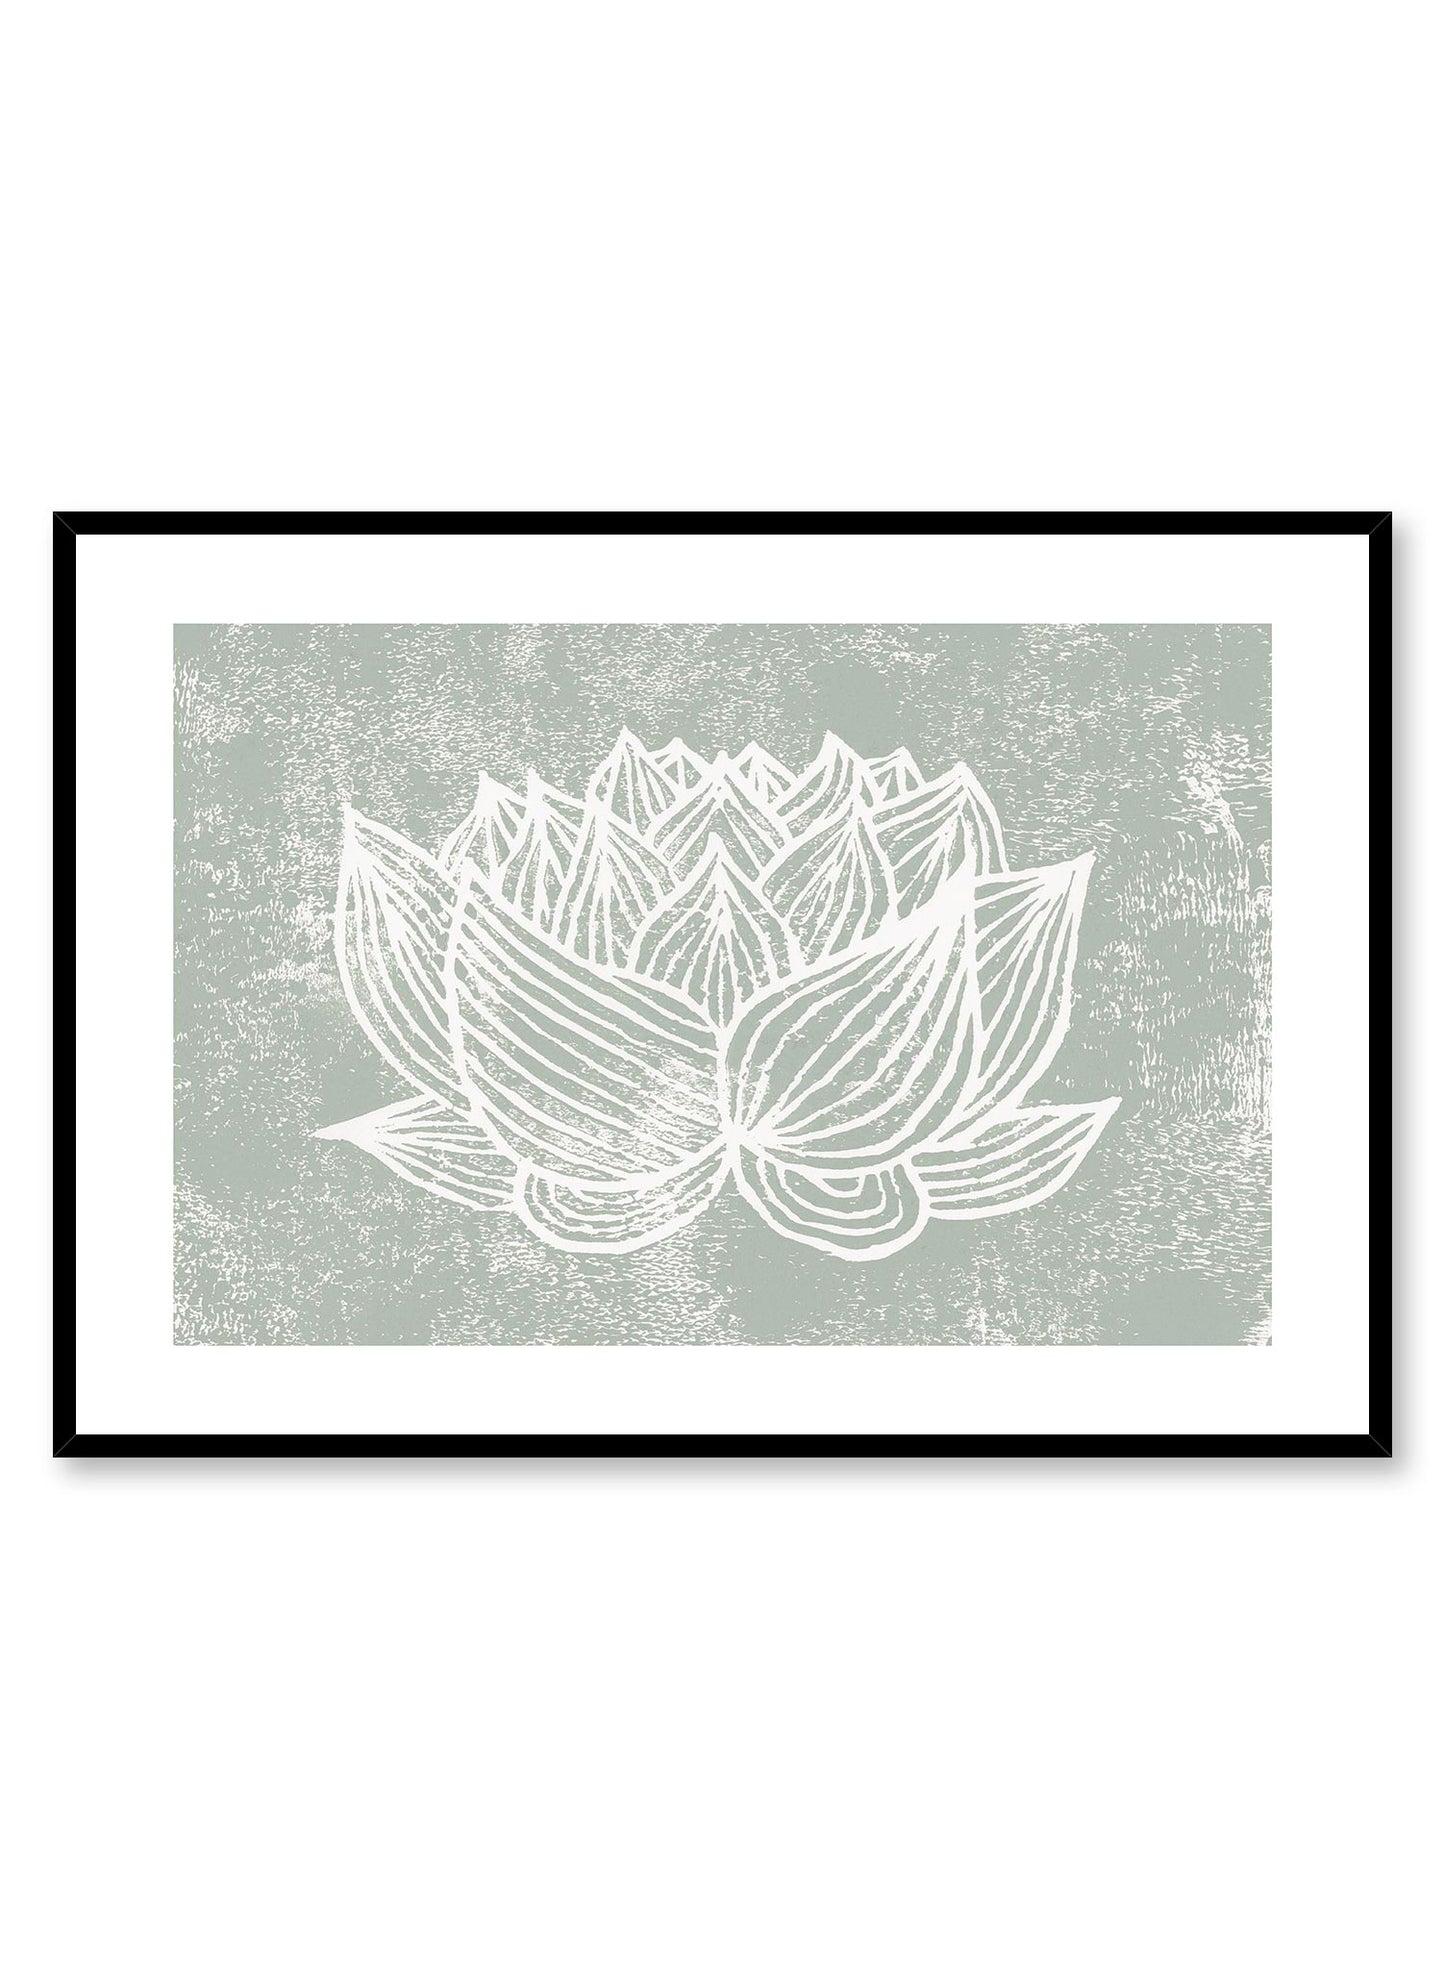 Lotus is a minimalist illustration by Opposite Wall of a huge lotus flower resembling a centerpiece.